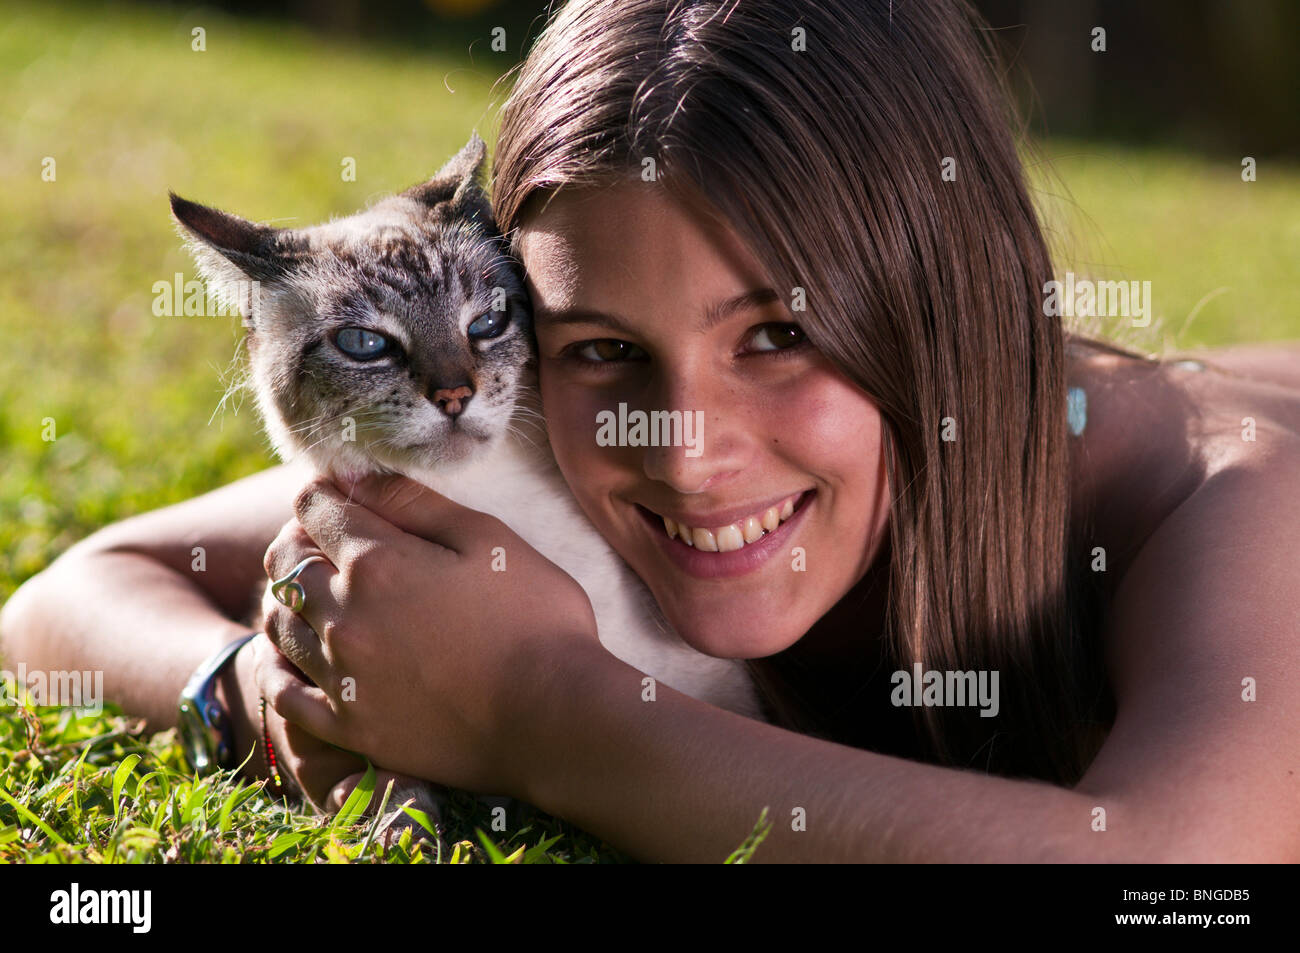 13 Year Old Girl Pet High Resolution Stock Photography and Images - Alamy